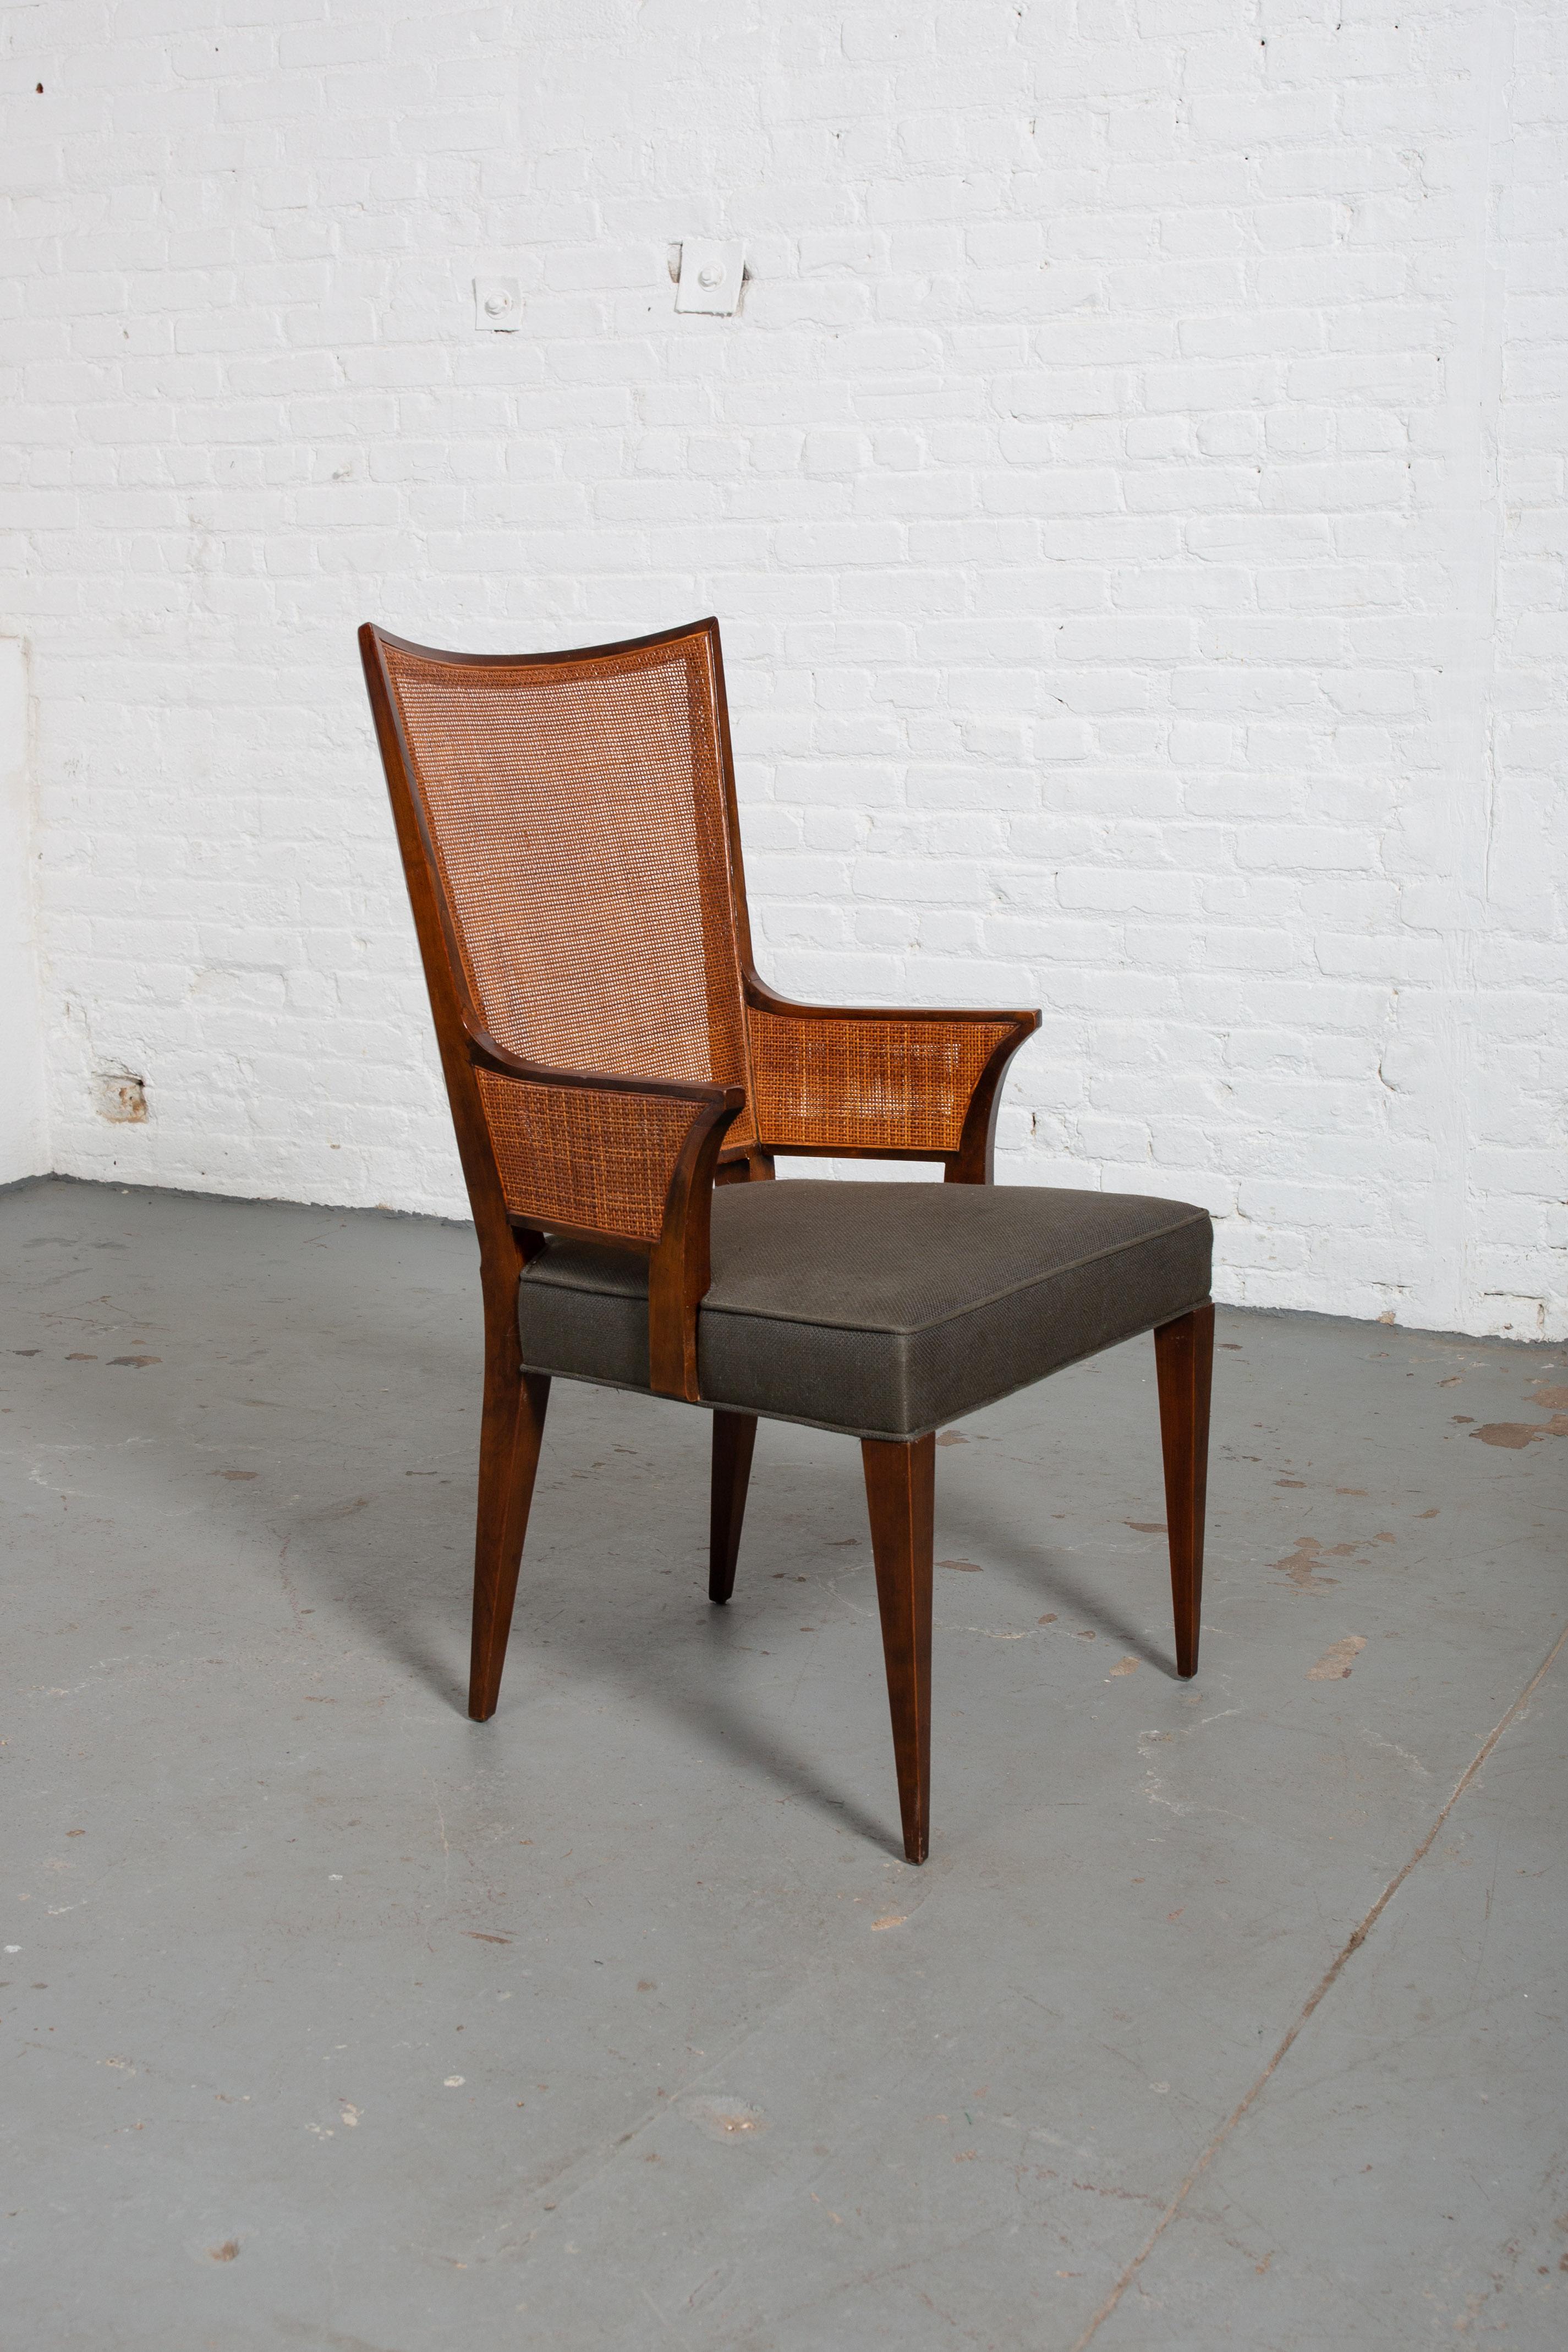 Set of 6 cane back dining chairs attributed to Harvey Probber with new upholstery and tapered legs. Very comfortable! Cane is in good condition. Chairs are in original condition with minor markings and scuffs to the wood.
Measures: Seat depth